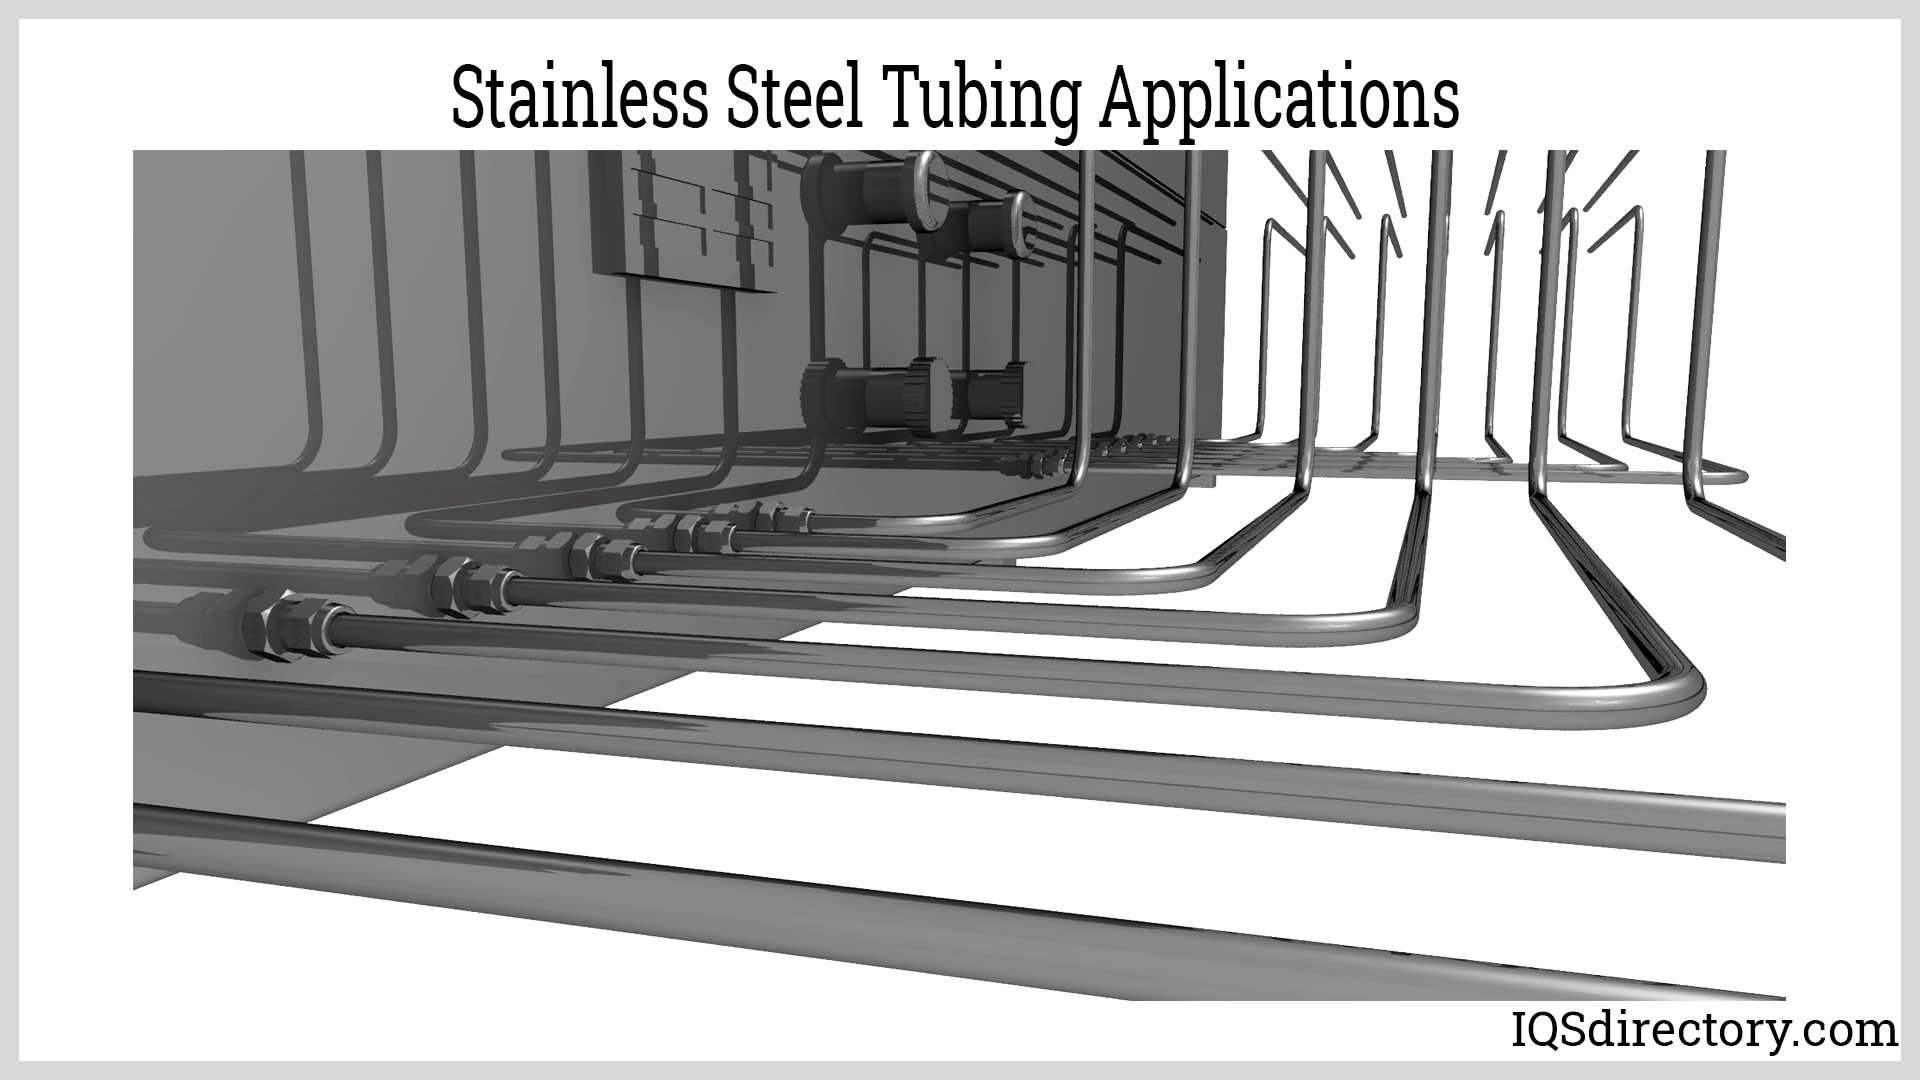 Stainless Steel Tubing Applications